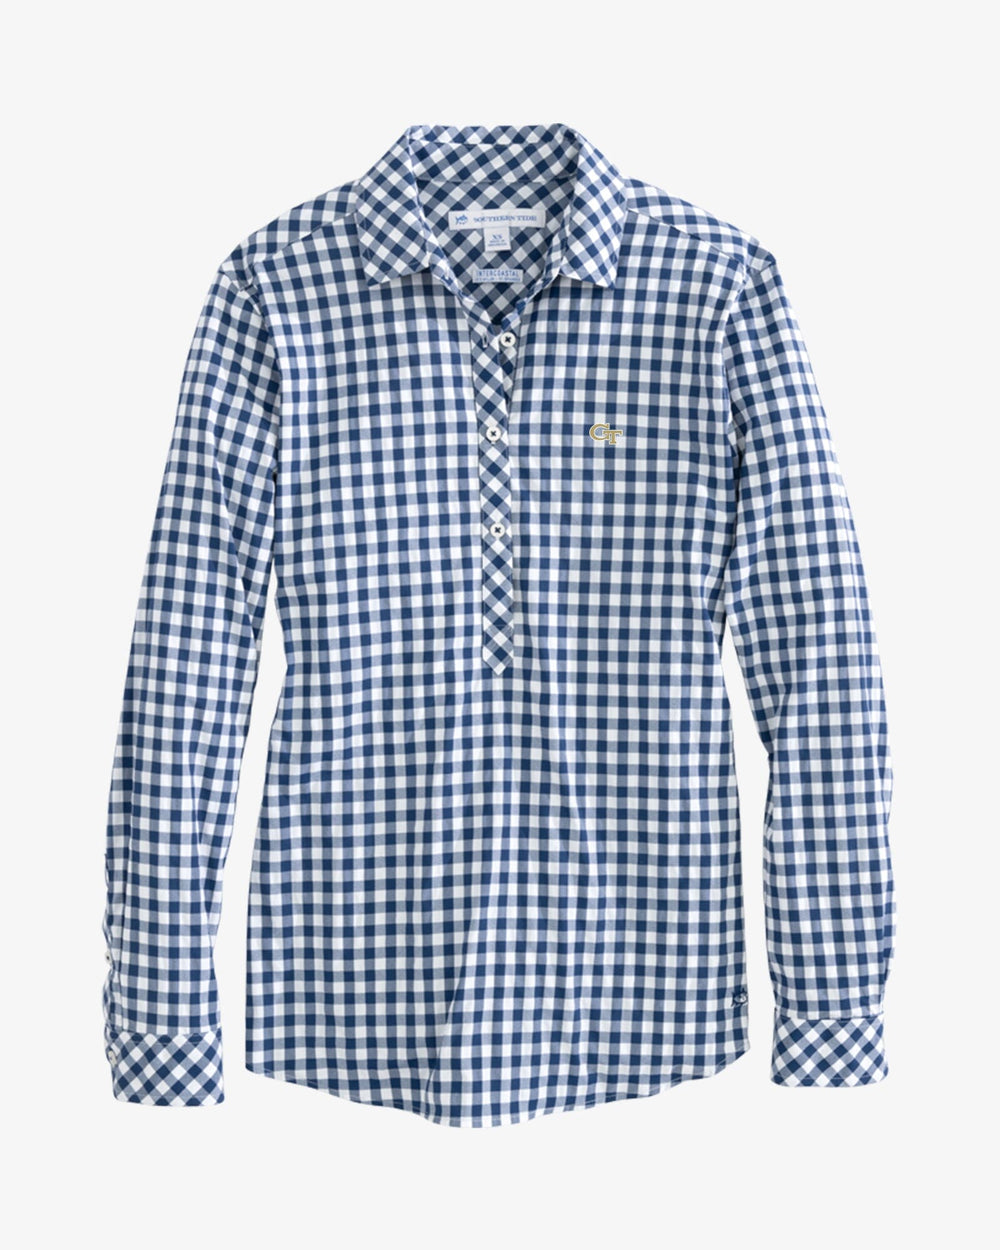 The front view of the Georgia Tech Yellow Jackets Intercoastal Hadley Popover Shirt by Southern Tide - Yacht Blue